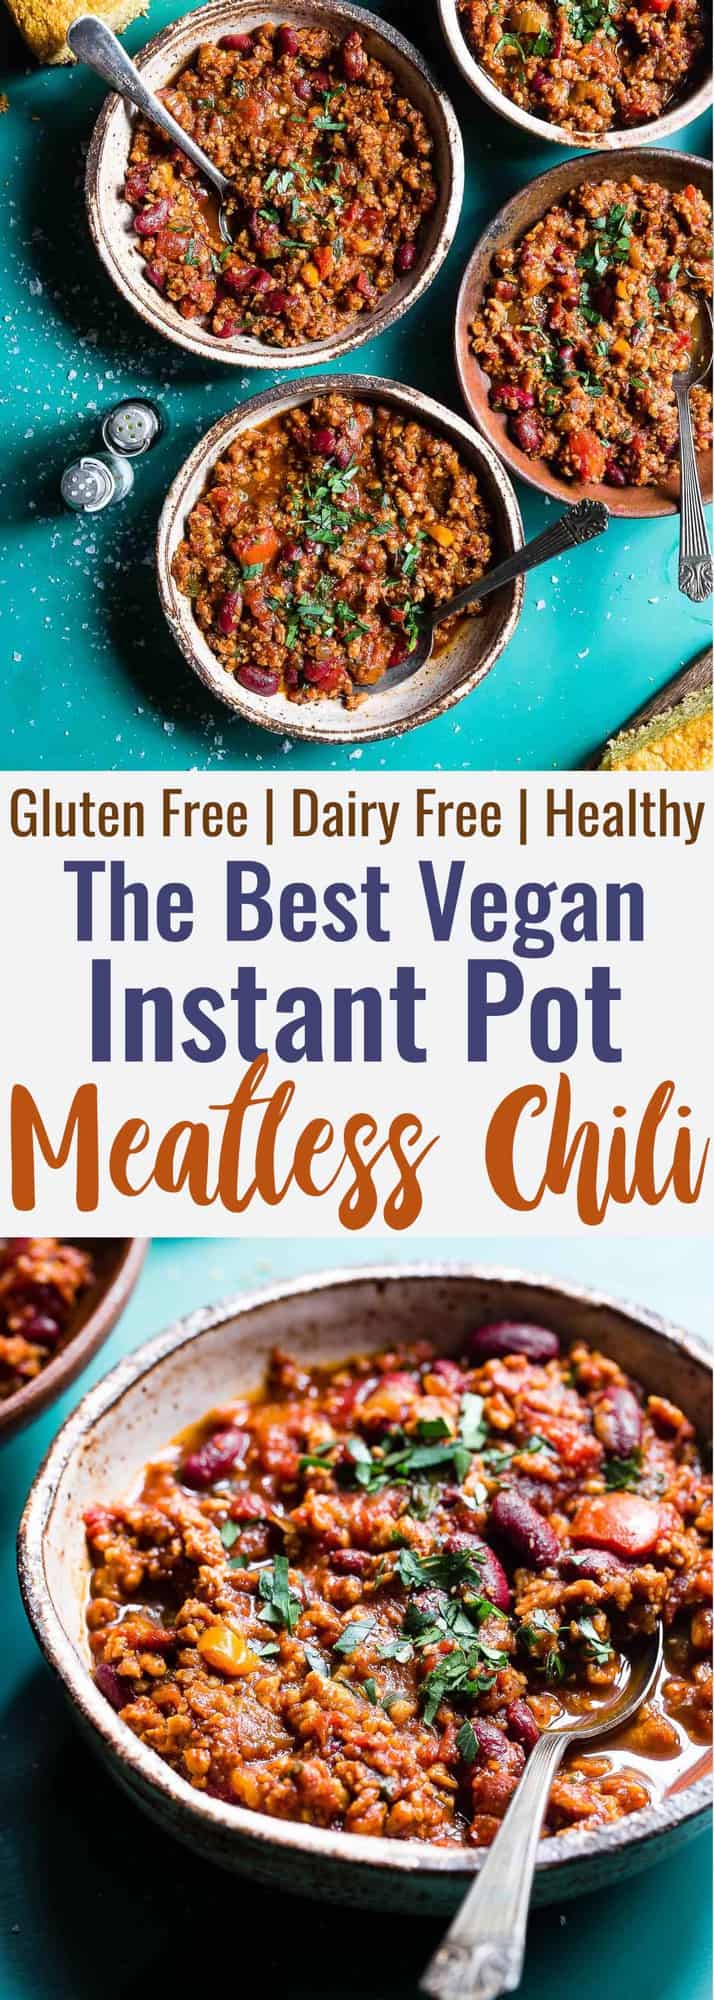 Instant Pot Meatless Vegan Chili -  You will NEVER believe that this is a vegetarian chili recipe! It's a healthy, gluten free weeknight meal that is ready in only 30 minutes! Even meat-eaters are going to LOVE this recipe! | #Foodfaithfitness | #Vegan #Vegetarian #Chili #Instantpot #healthy